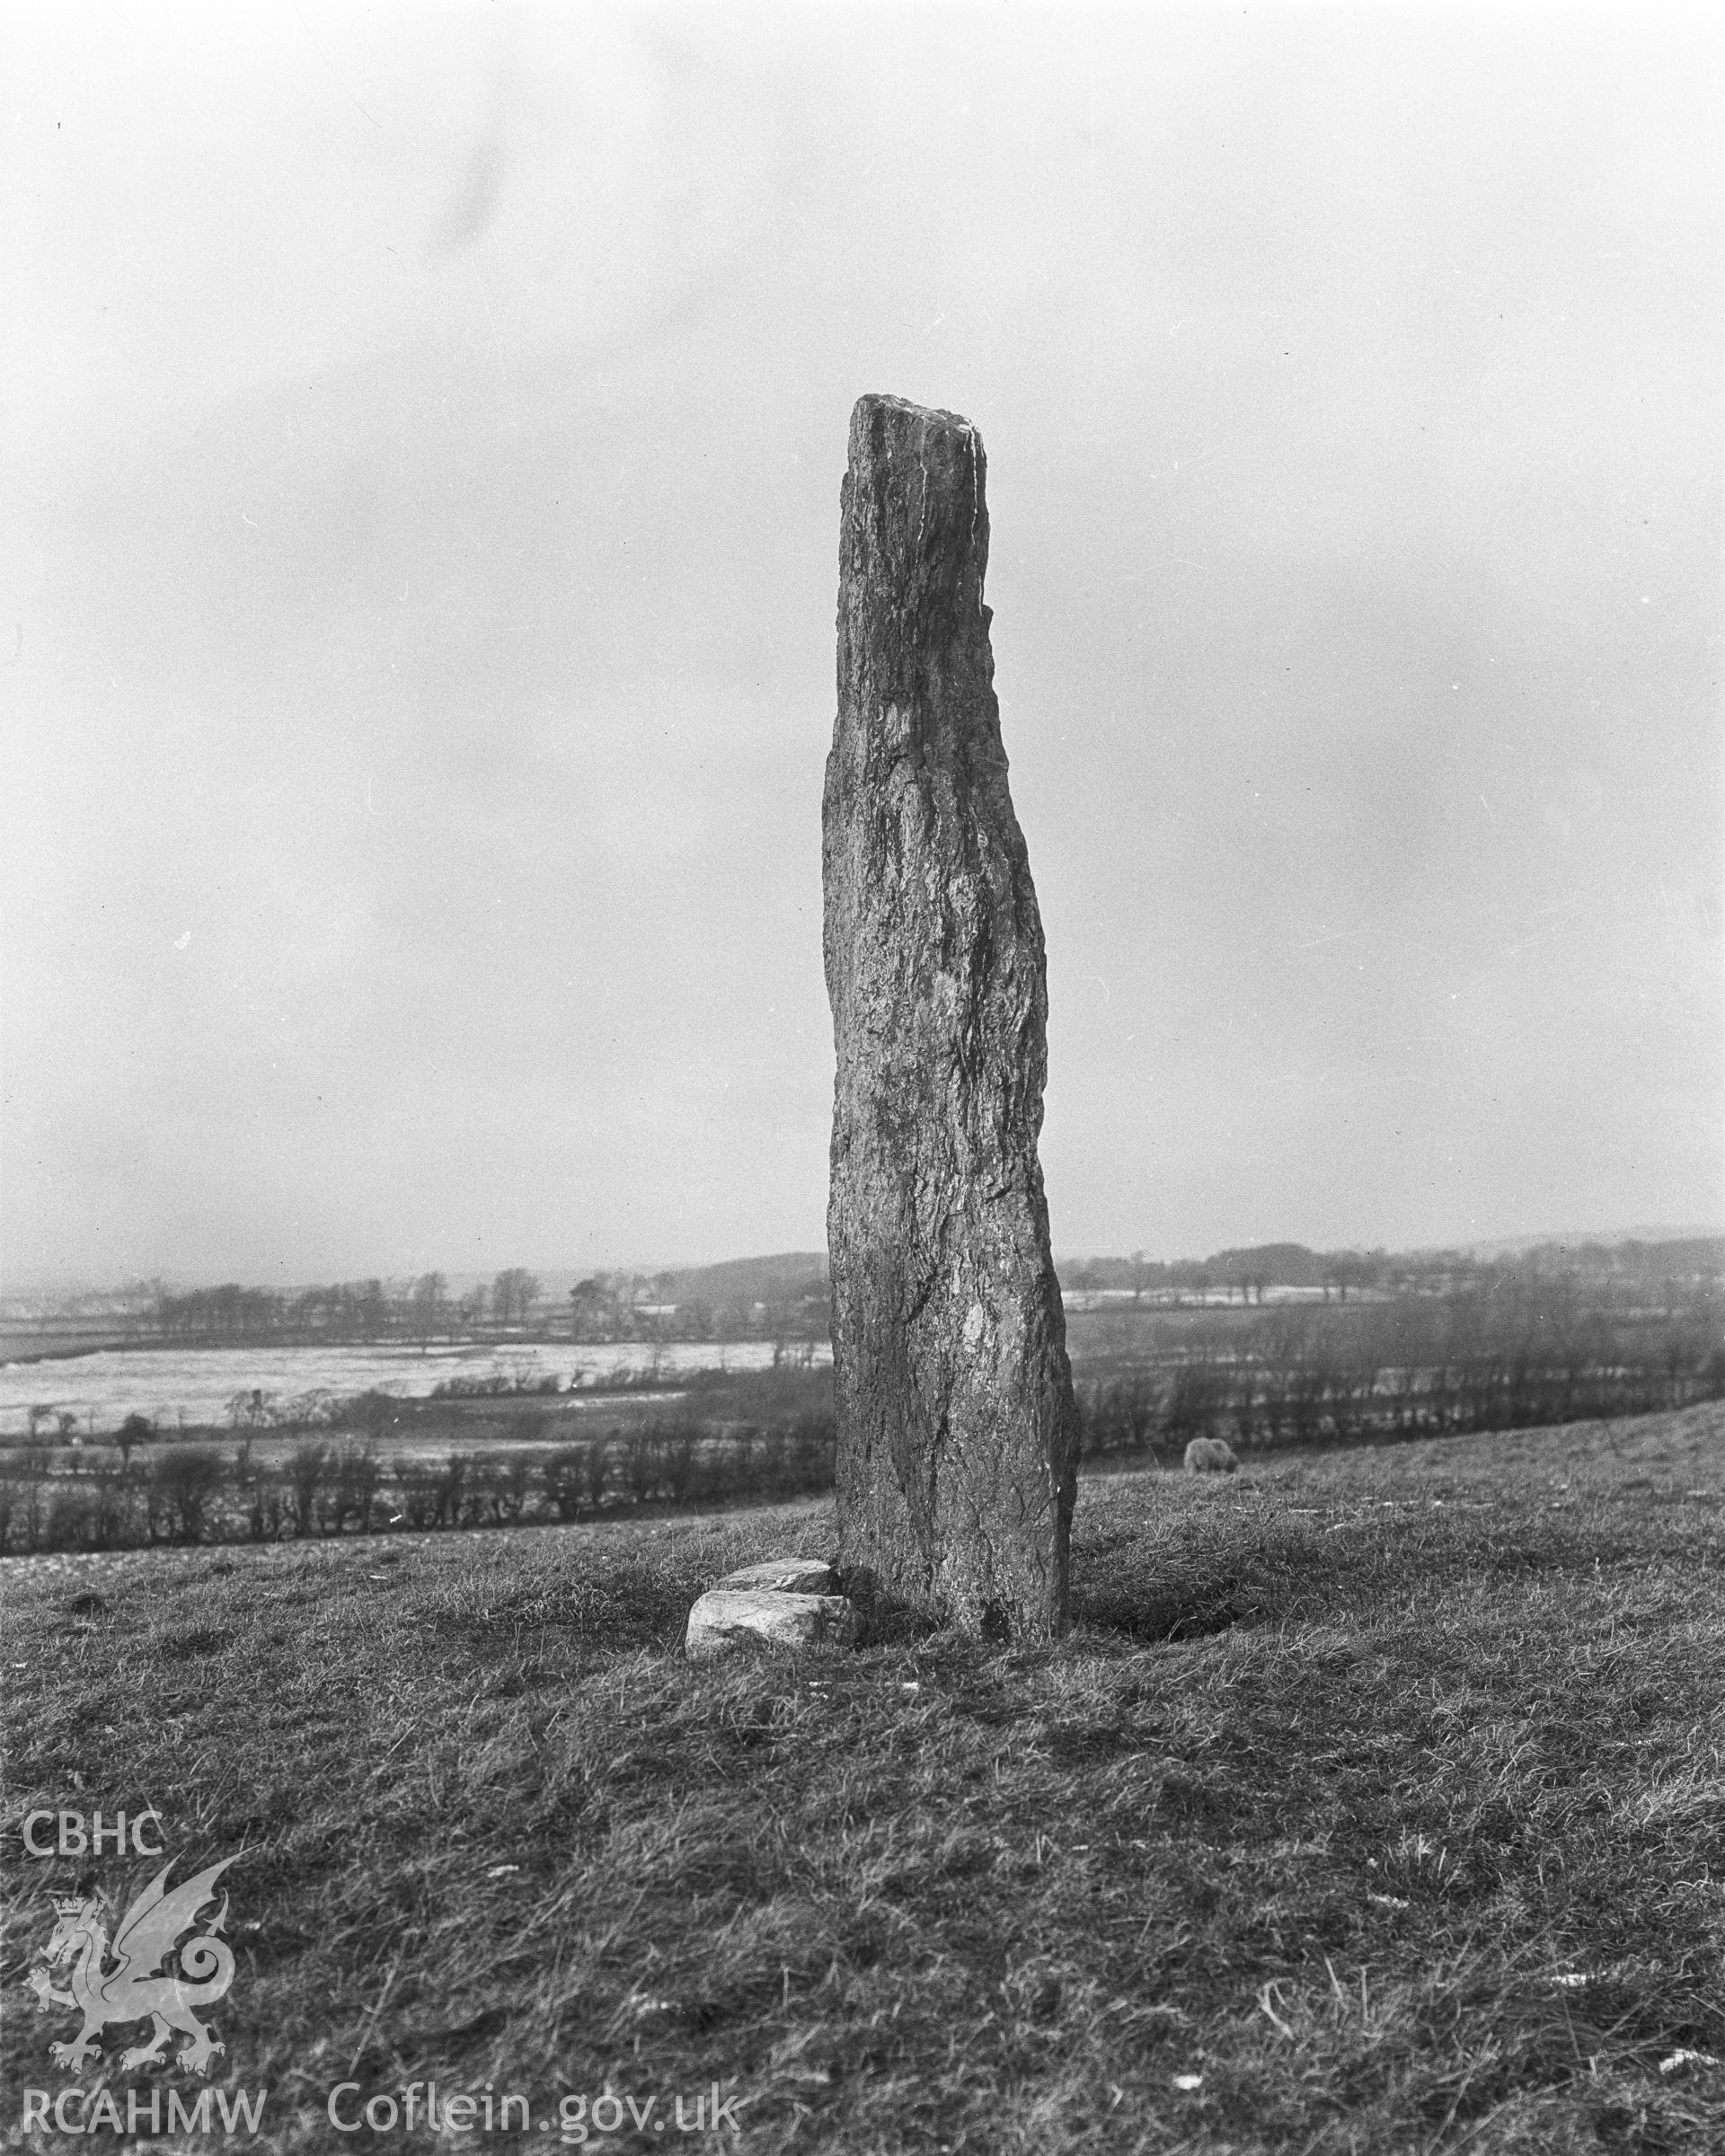 Black and white photgraph showing Plas Cadnant Standing Stone, taken by RCAHMW before 1960.